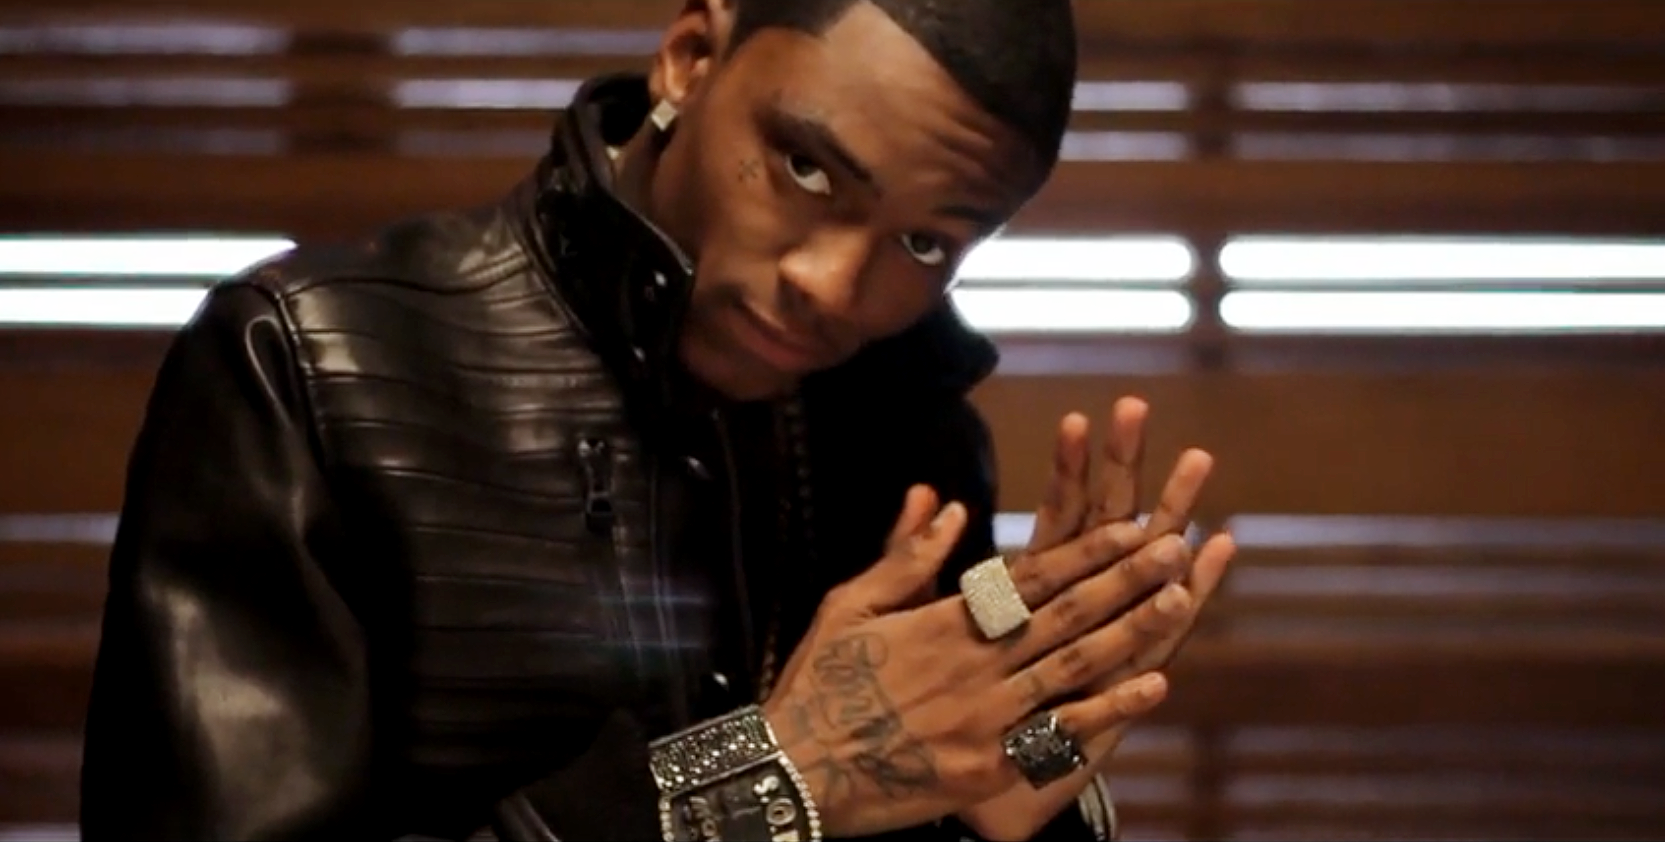 Soulja Boy Album Pulled From Streaming Services Over Copyright Claim, News